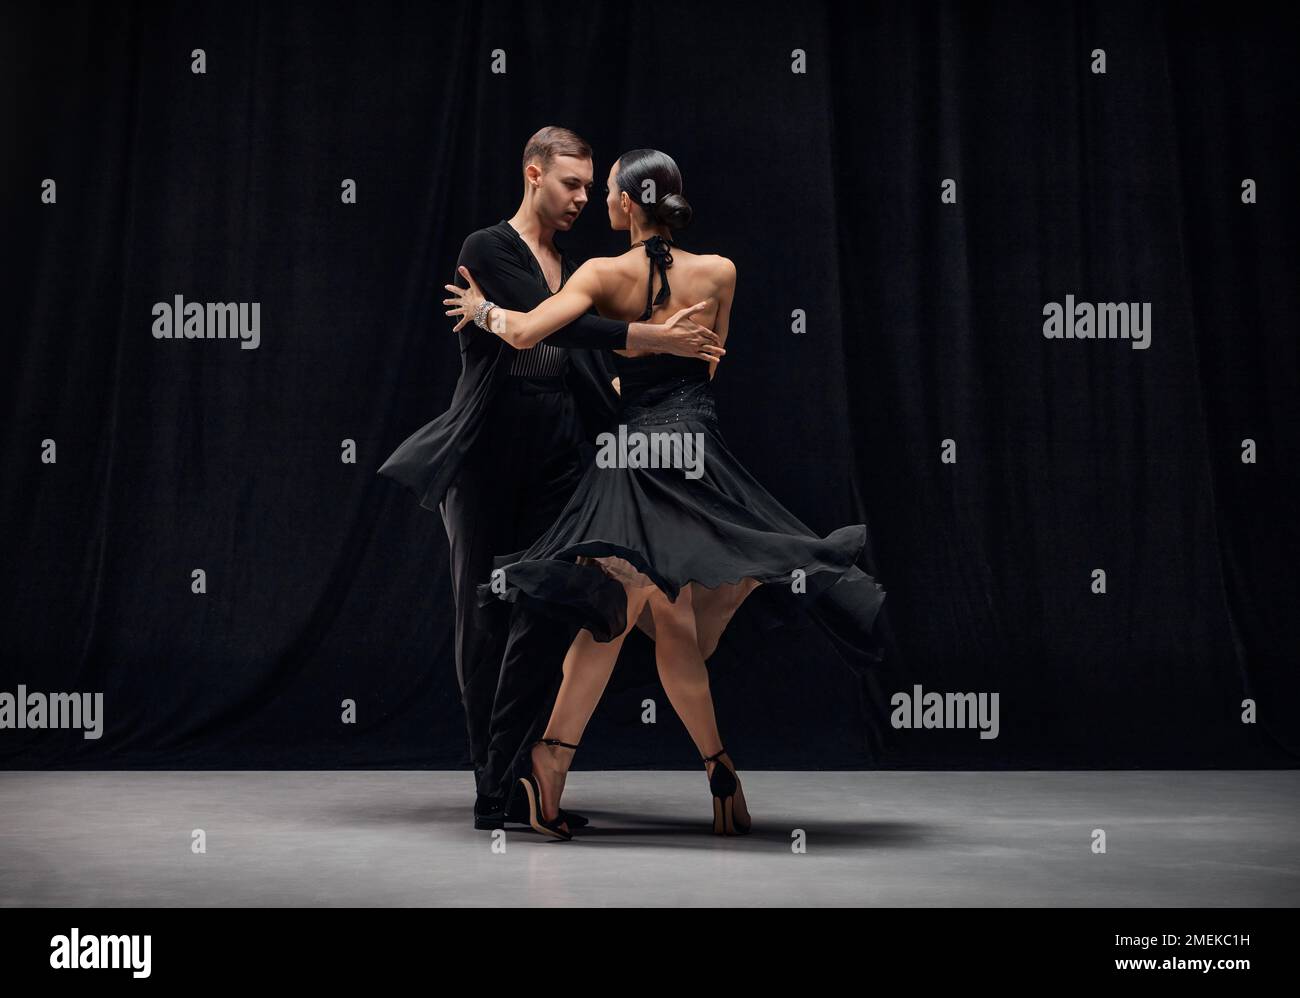 Romantic couple dance. Man and woman, professional tango dancers performing in black stage costumes over black background. Stock Photo